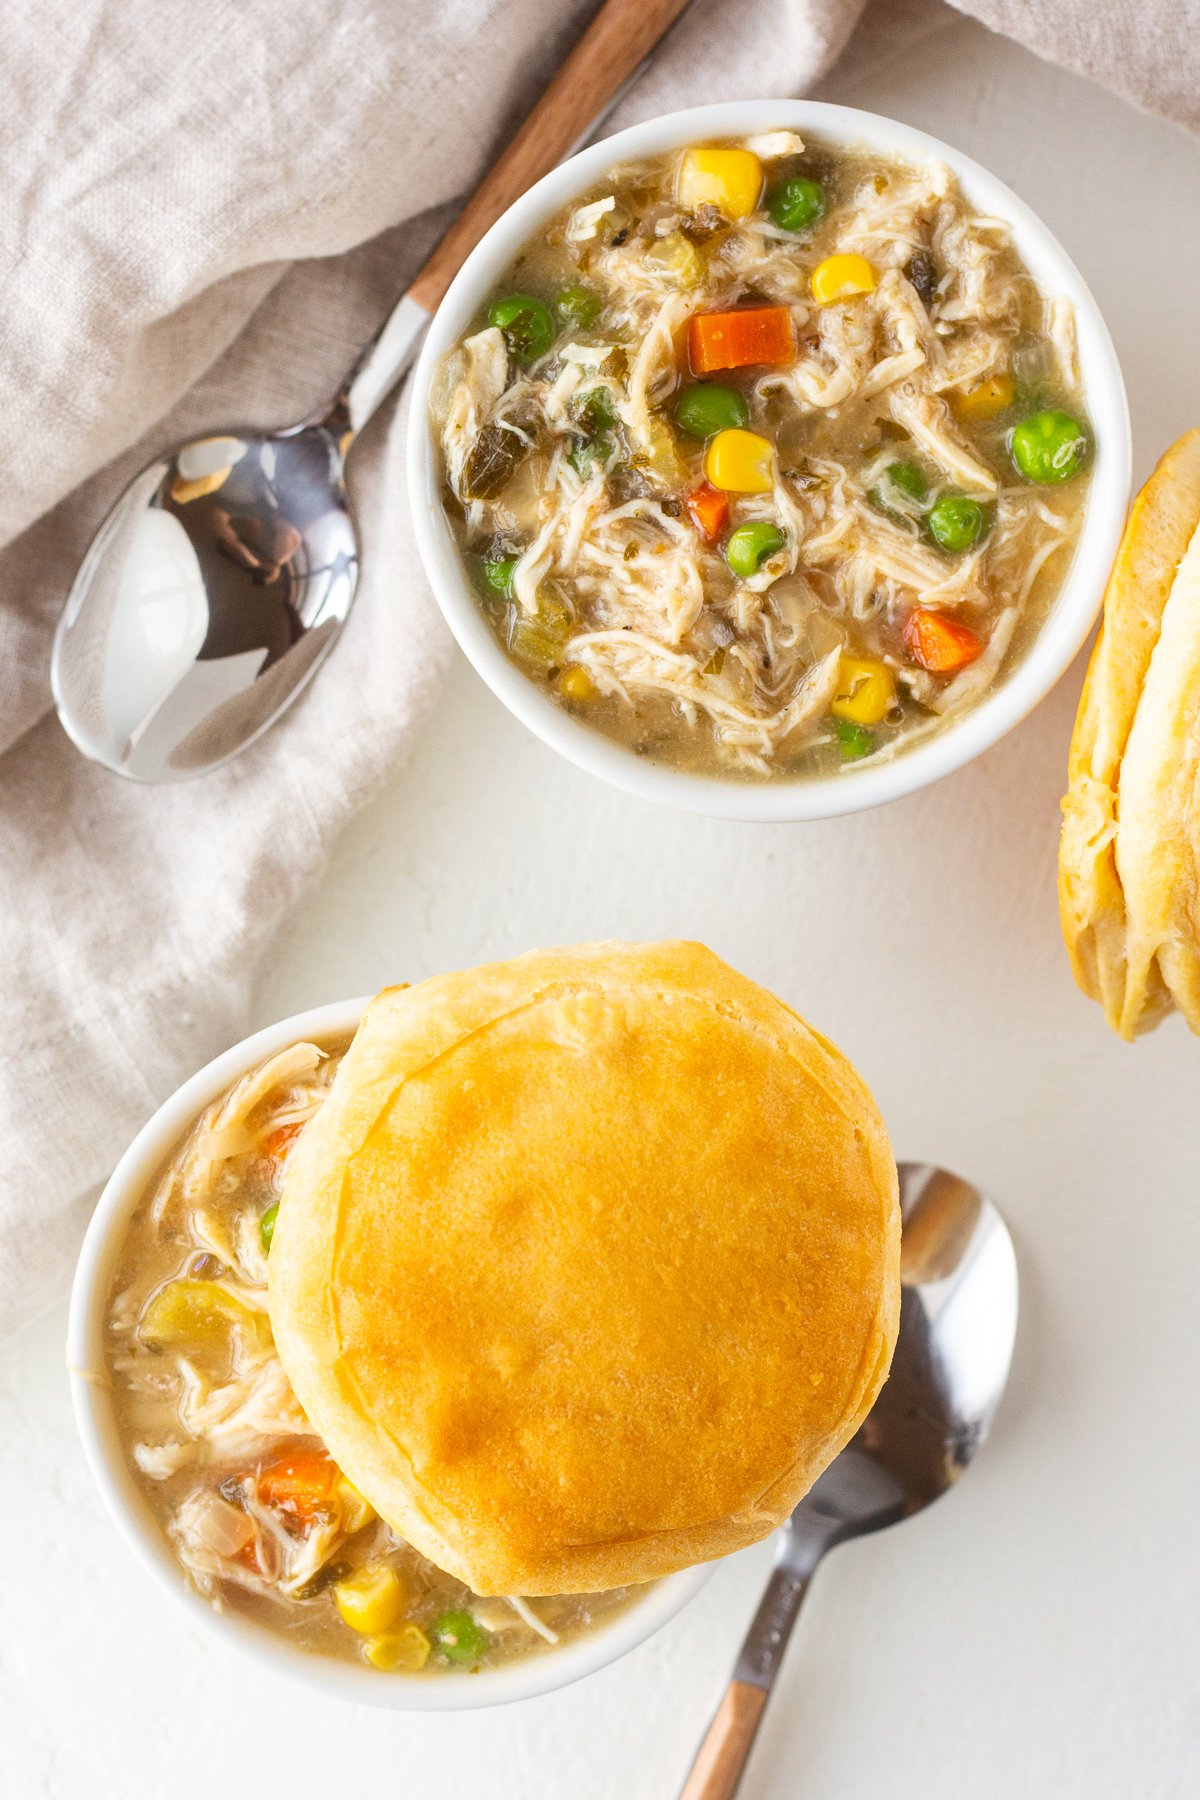 Top view of two bowls of chicken pot pie, one topped with a biscuit.